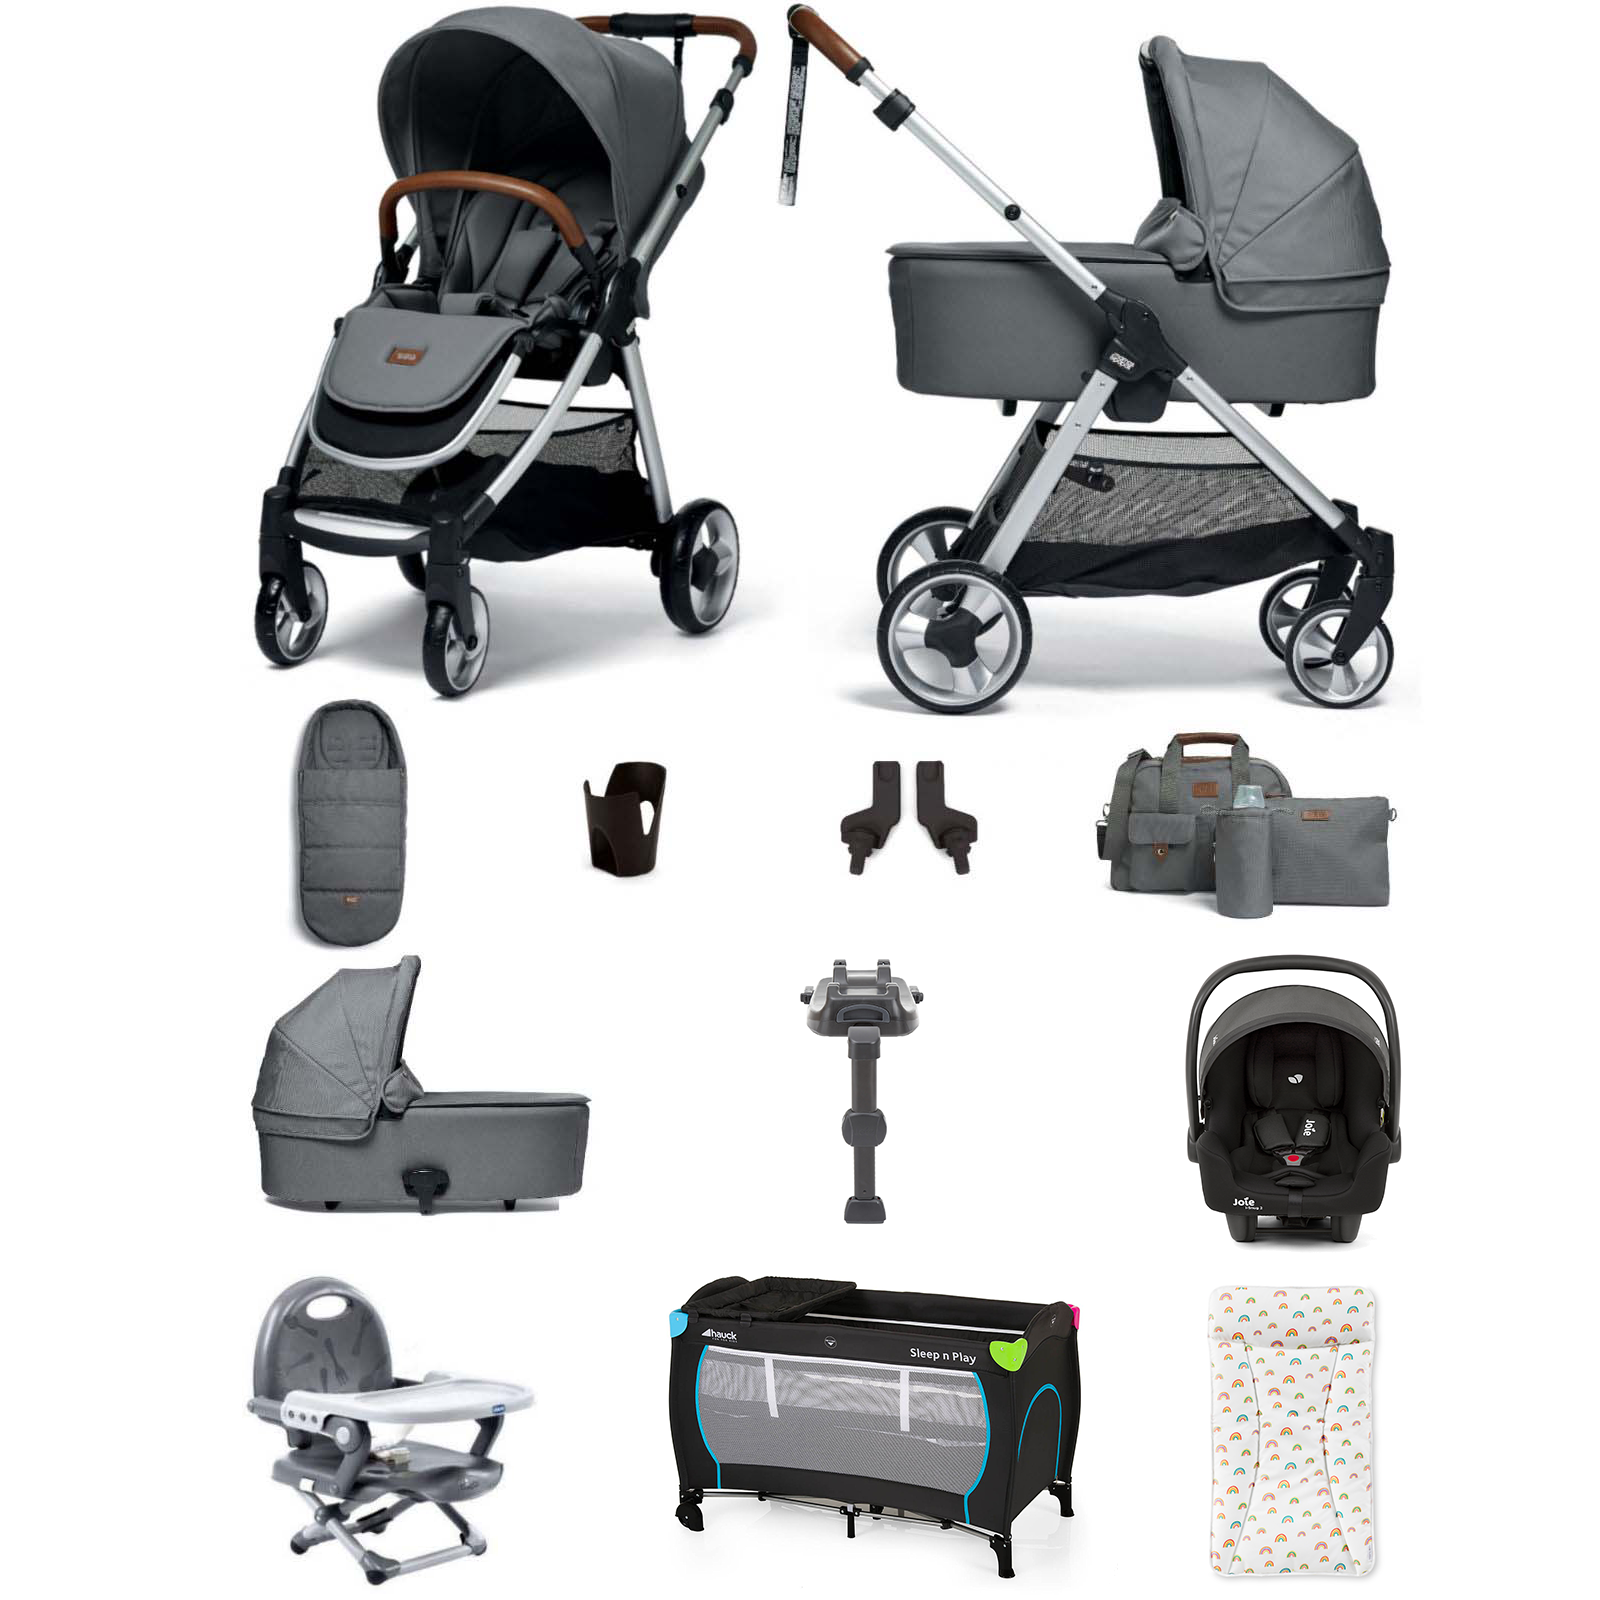 Mamas & Papas Flip XT2 12pc Essentials (i-Snug 2 Car Seat) Everything You Need Travel System Bundle with Carrycot & ISOFIX Base - Sage Green